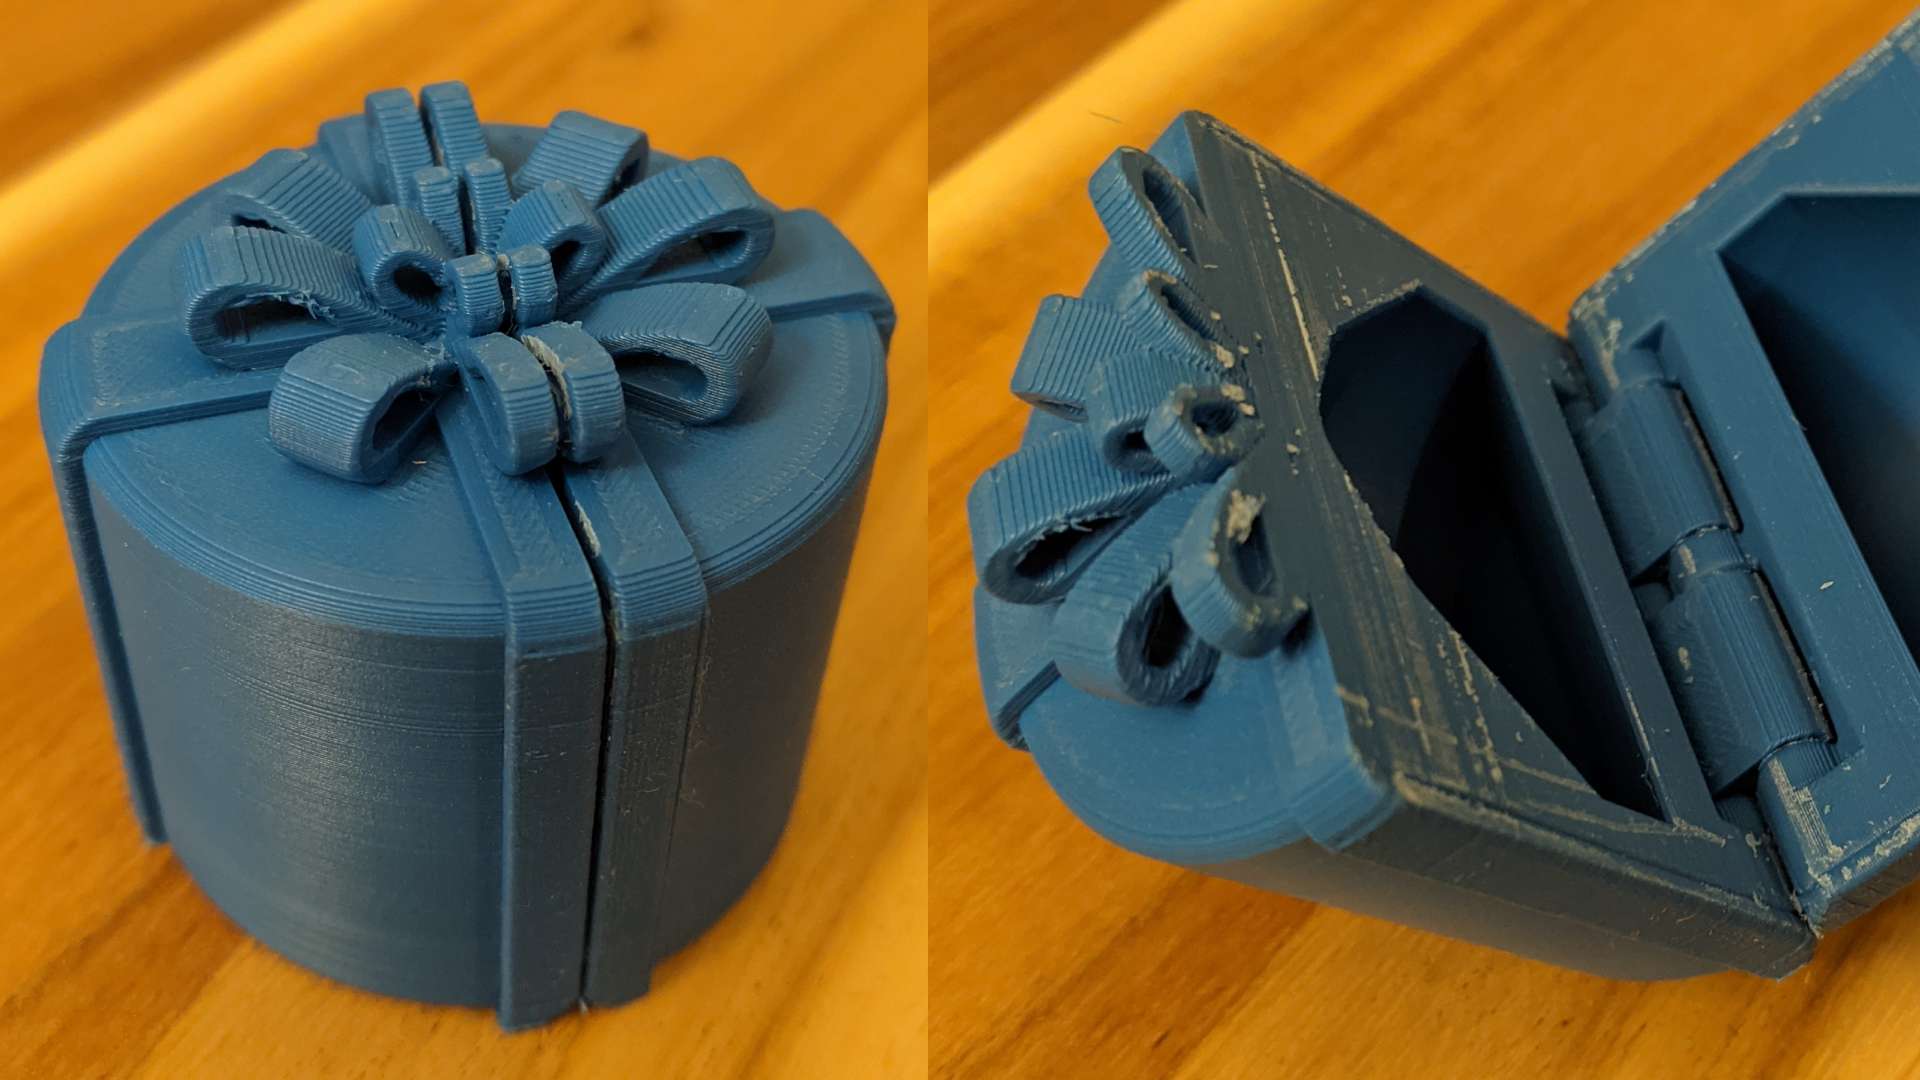 Surprise Inside Present Ornament (Print-in-Place HOLLOW)